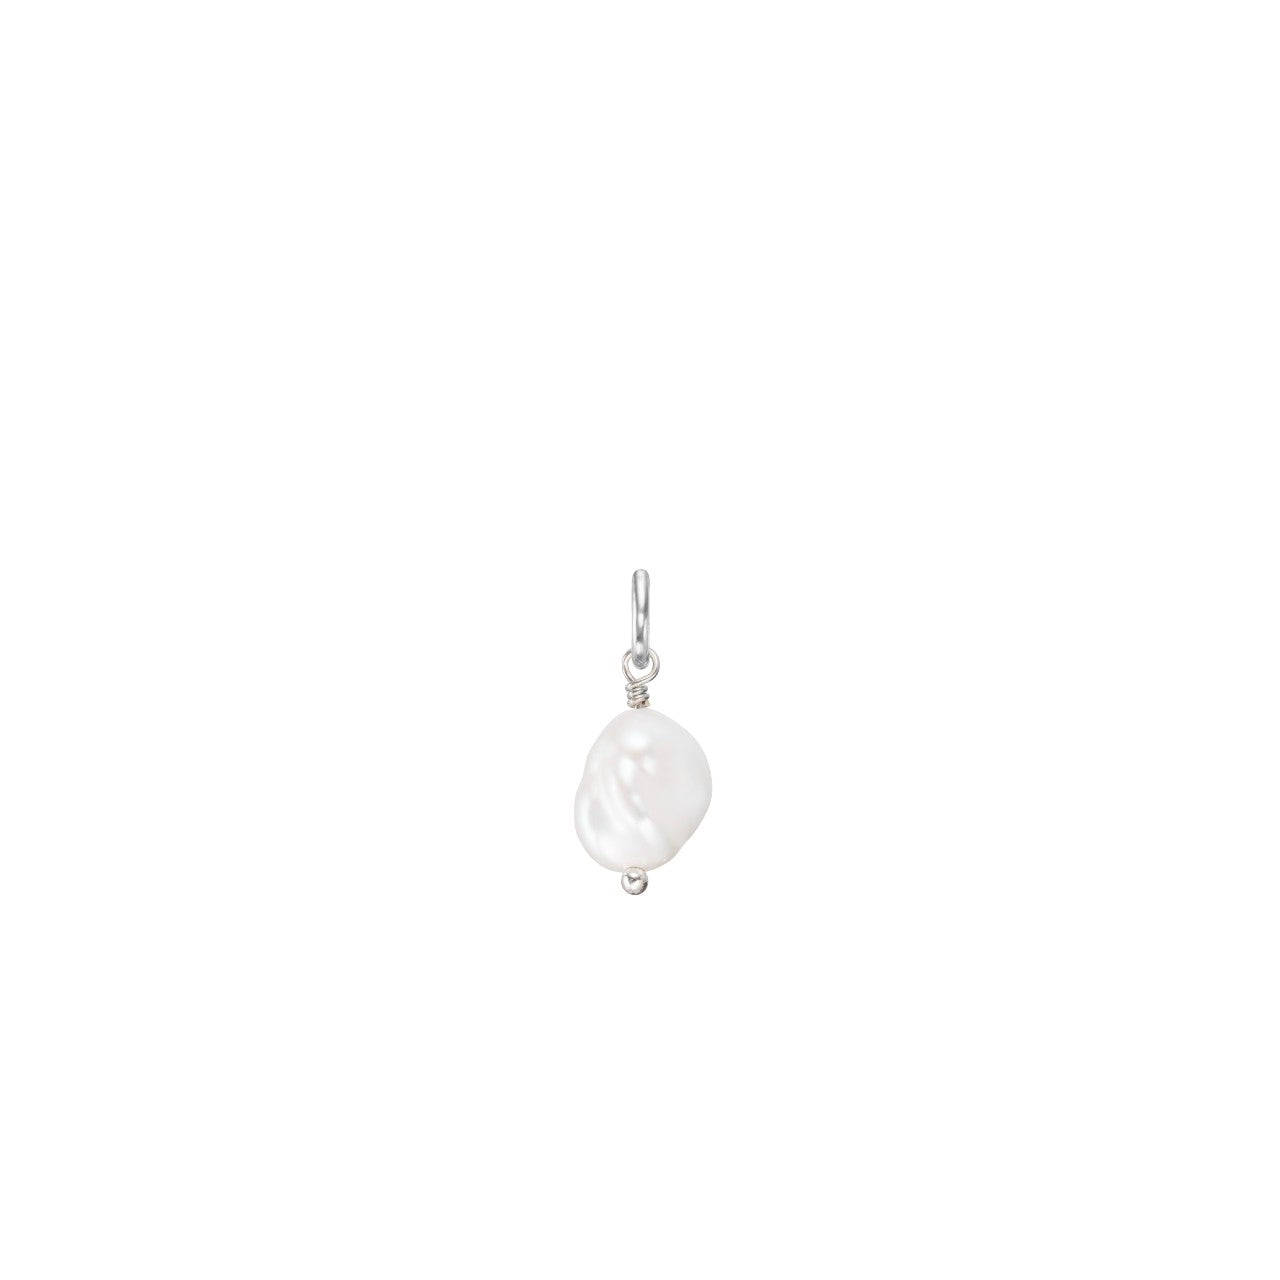 Additional Stone | Pearl (Silver)